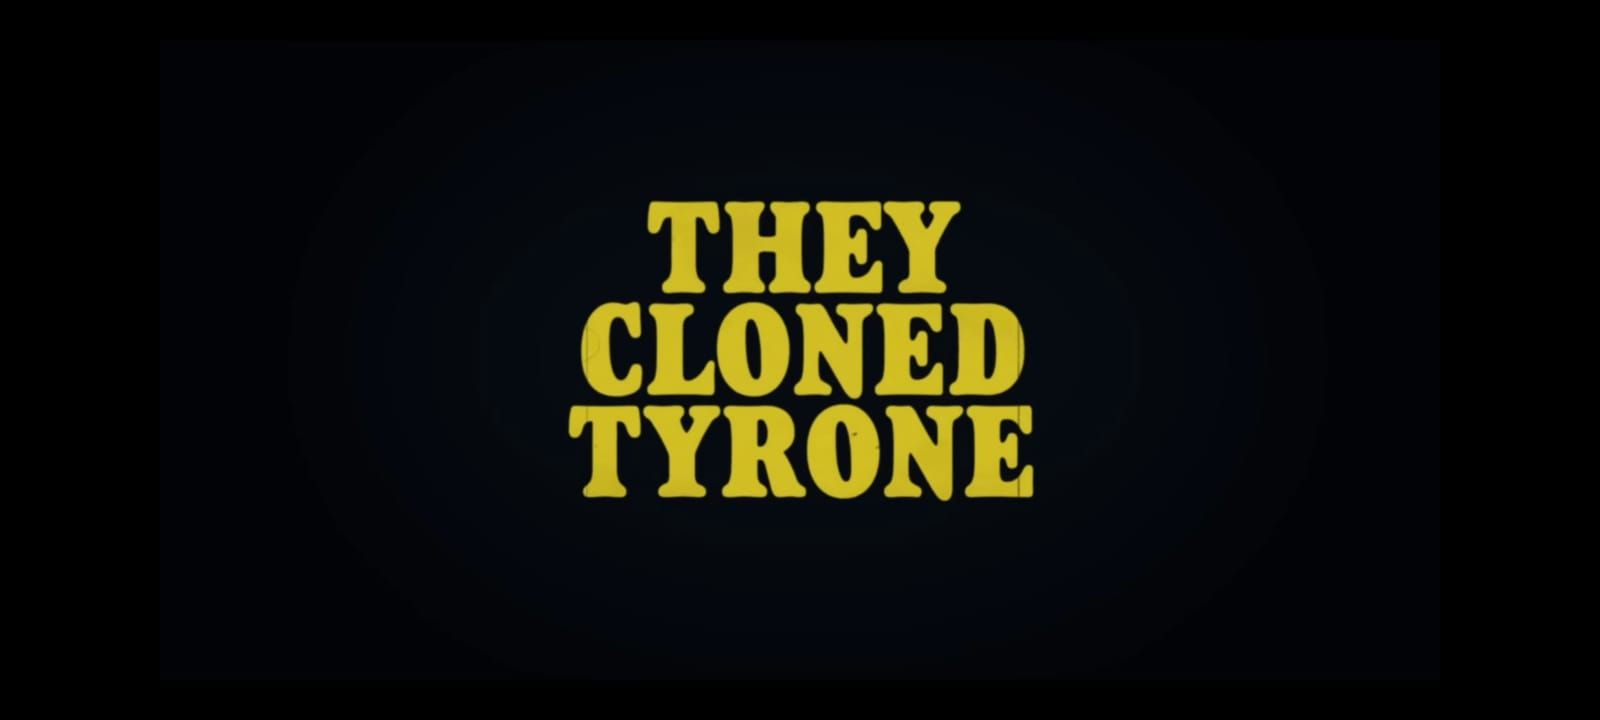 They Cloned Tyrone: Release date, cast, plot, and more